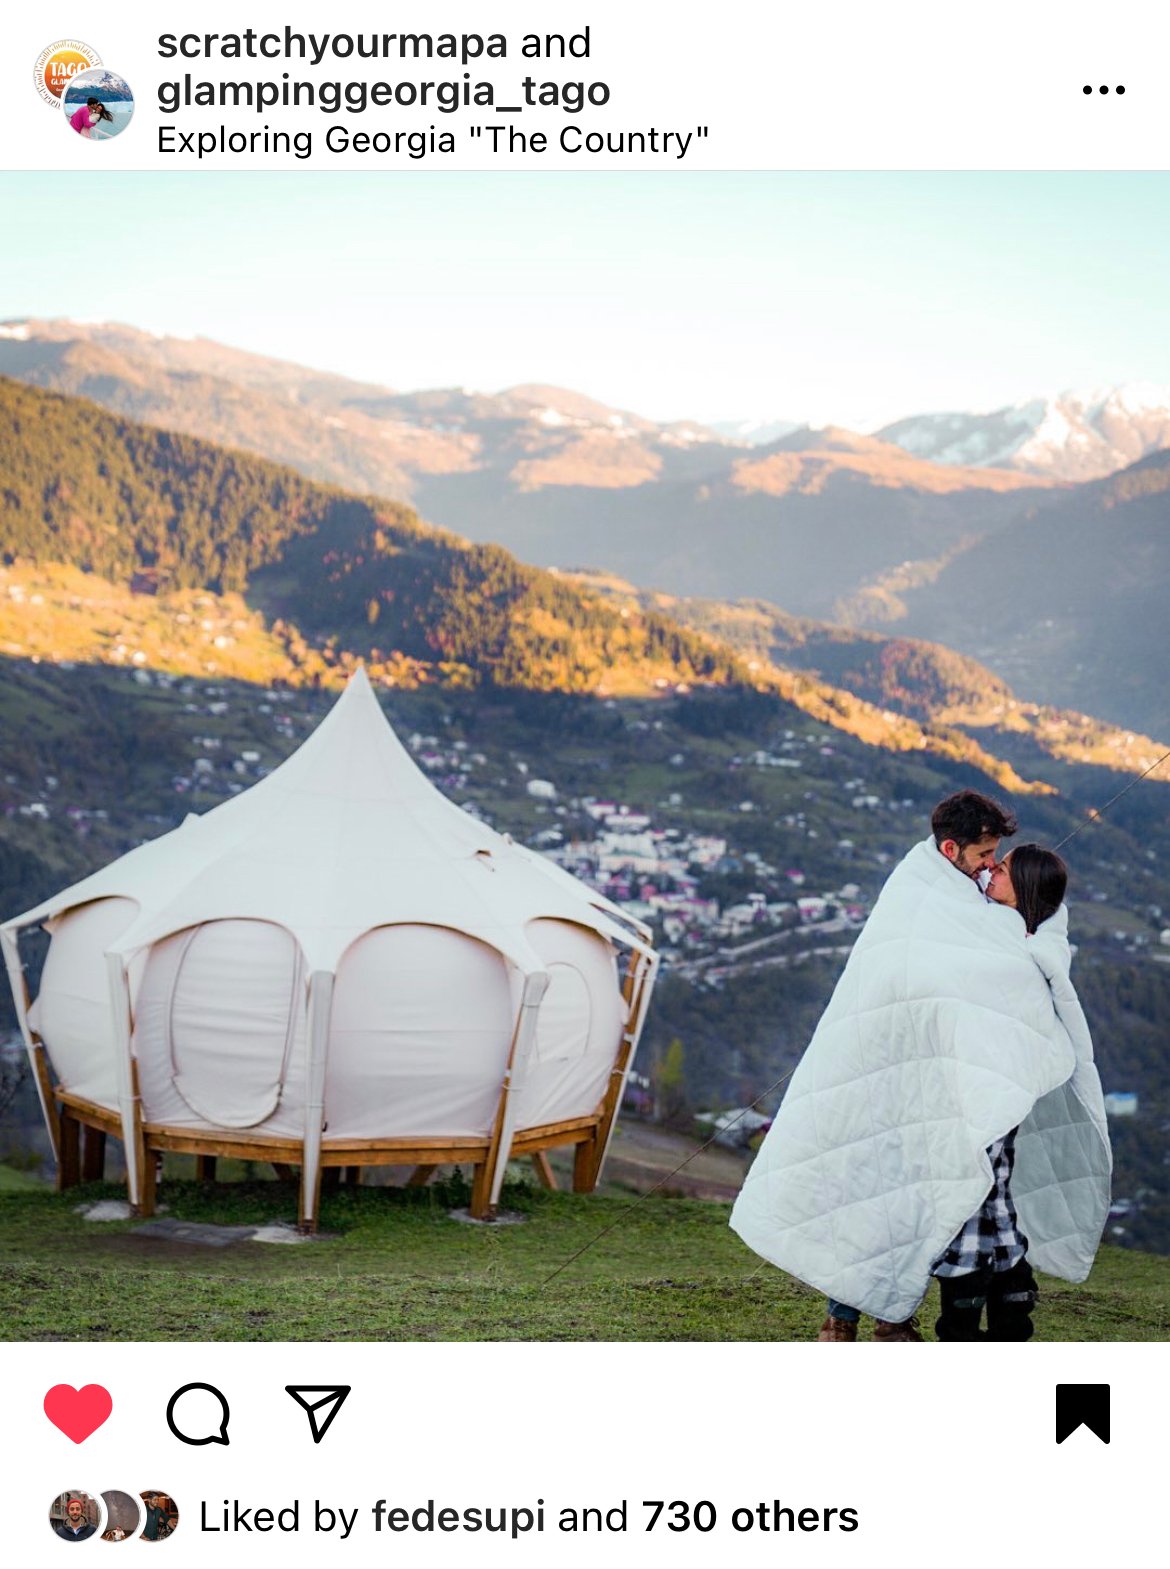 Glamping Tago, places to visit in Georgia